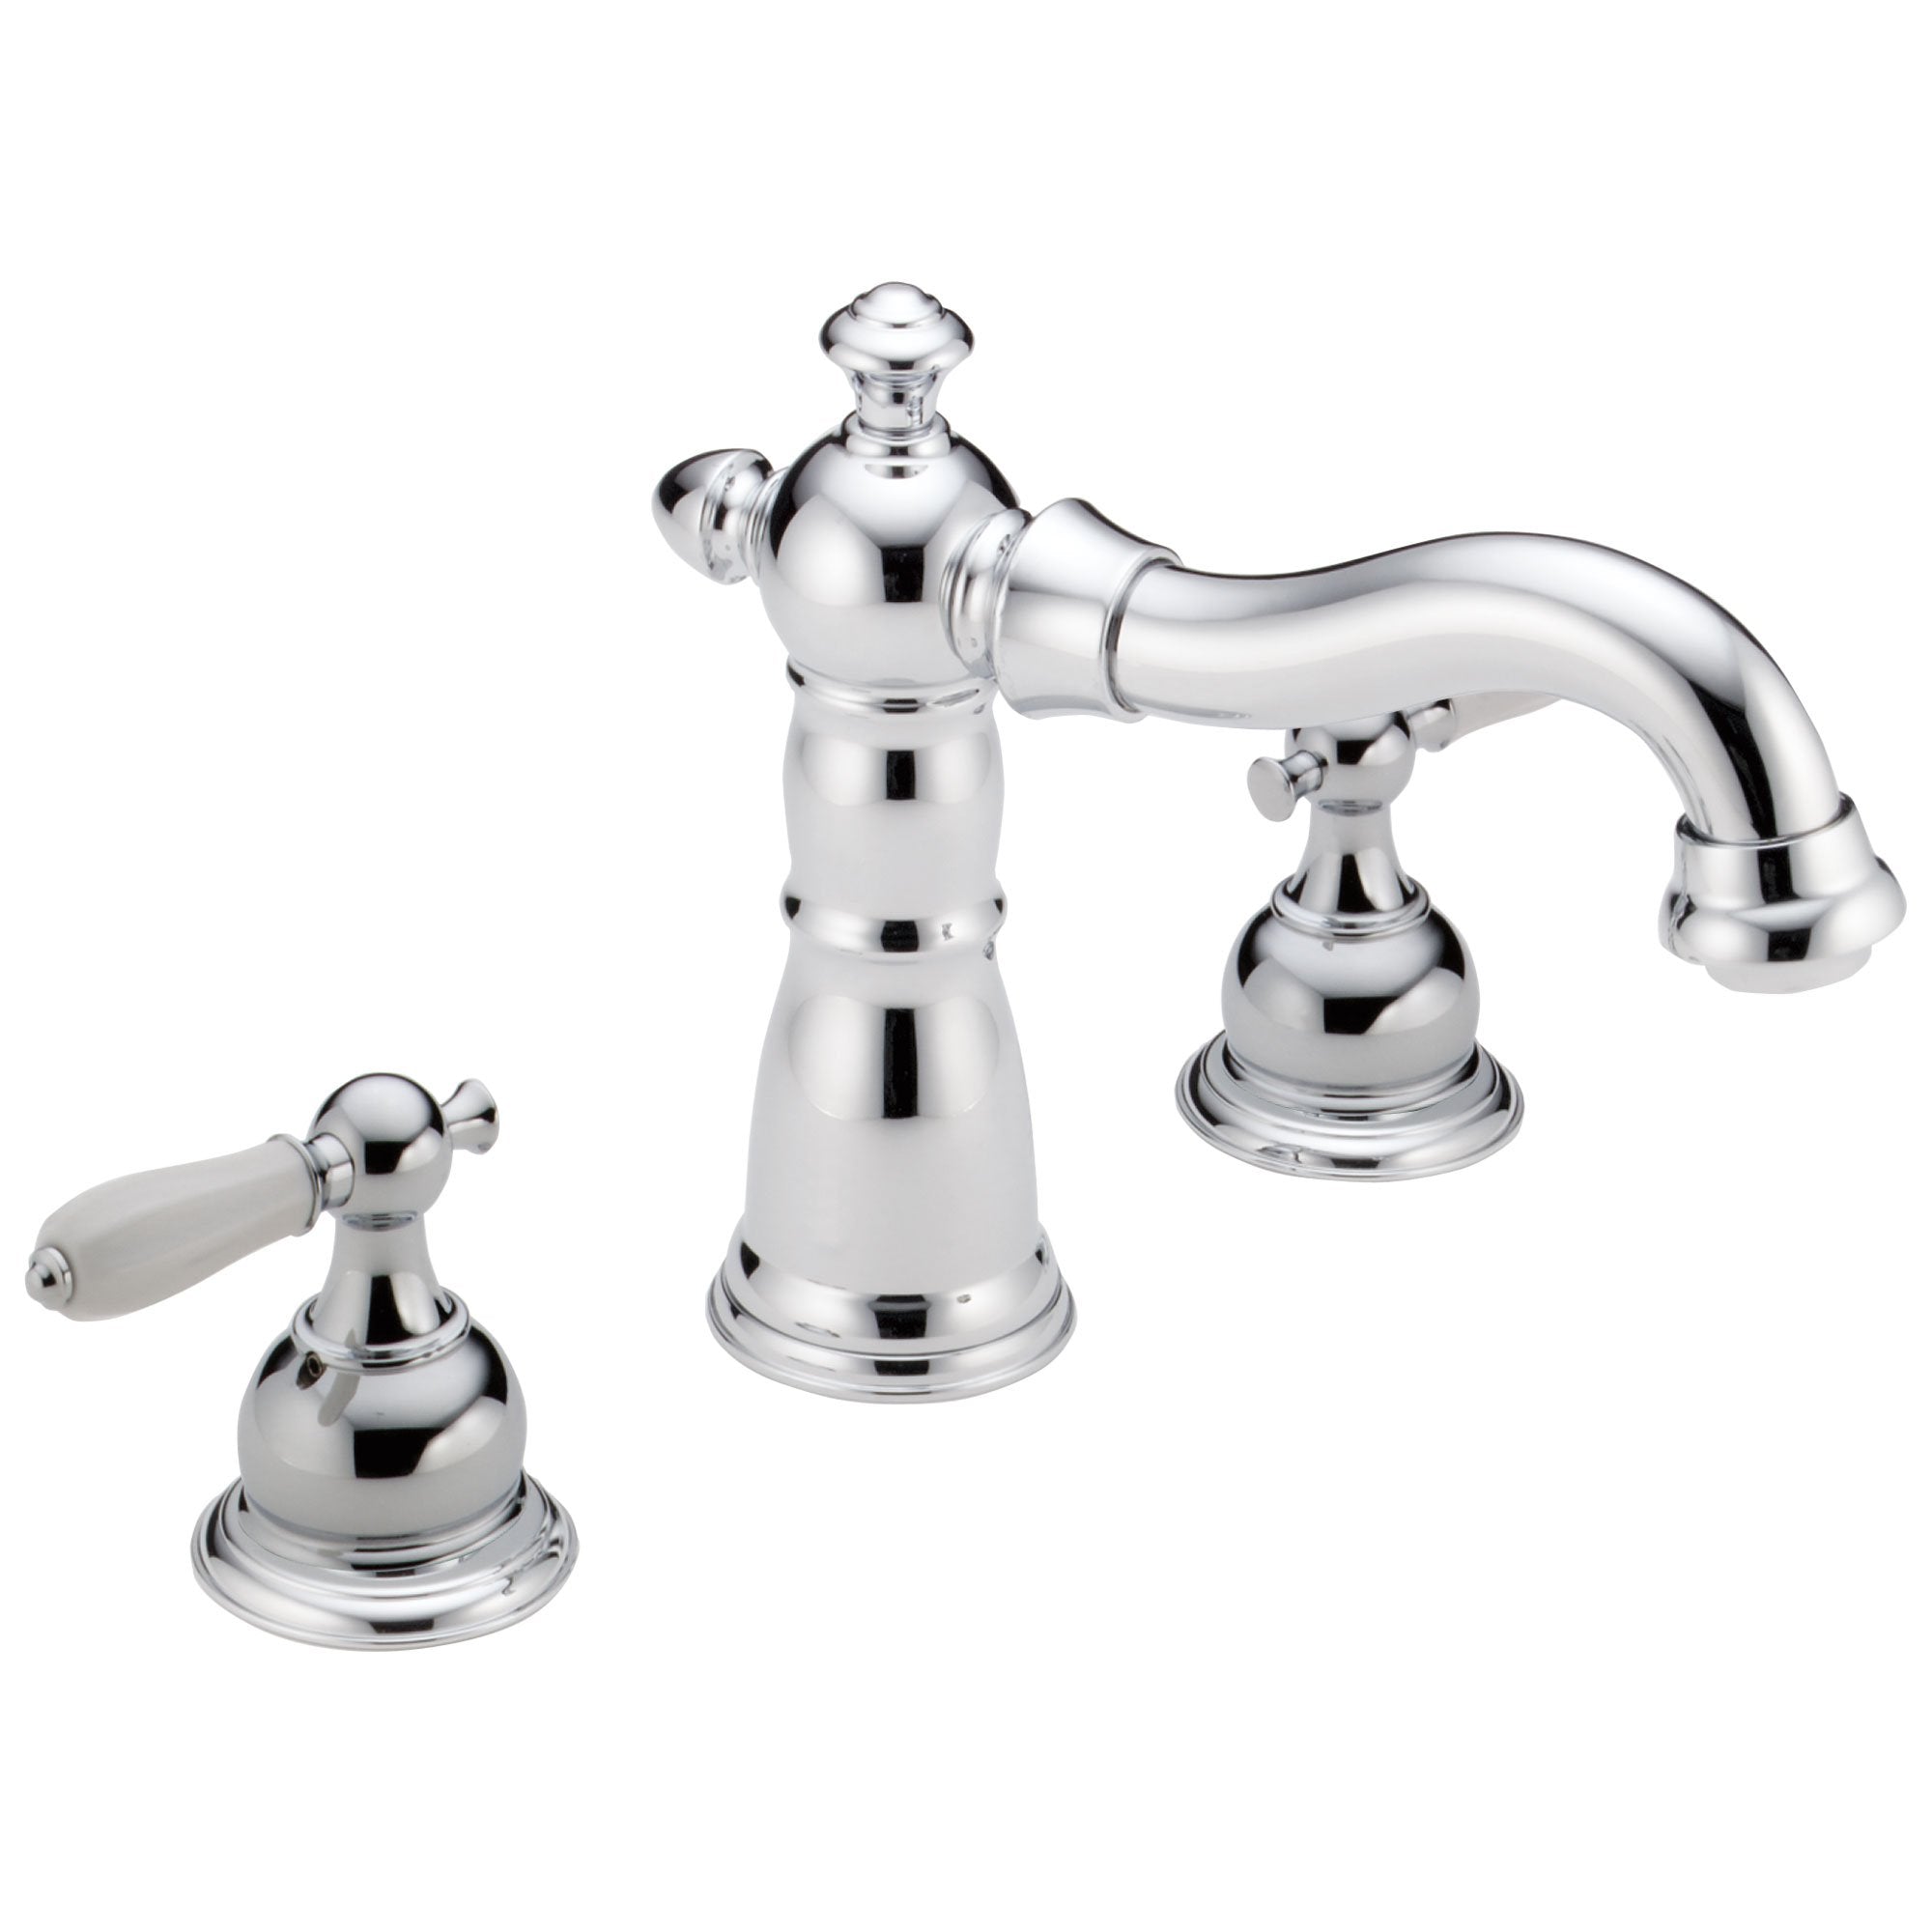 Delta Victorian Collection Chrome Finish Traditional Roman Tub Filler Faucet COMPLETE ITEM Includes (2) White Porcelain Lever Handles and Rough-in Valve D1462V